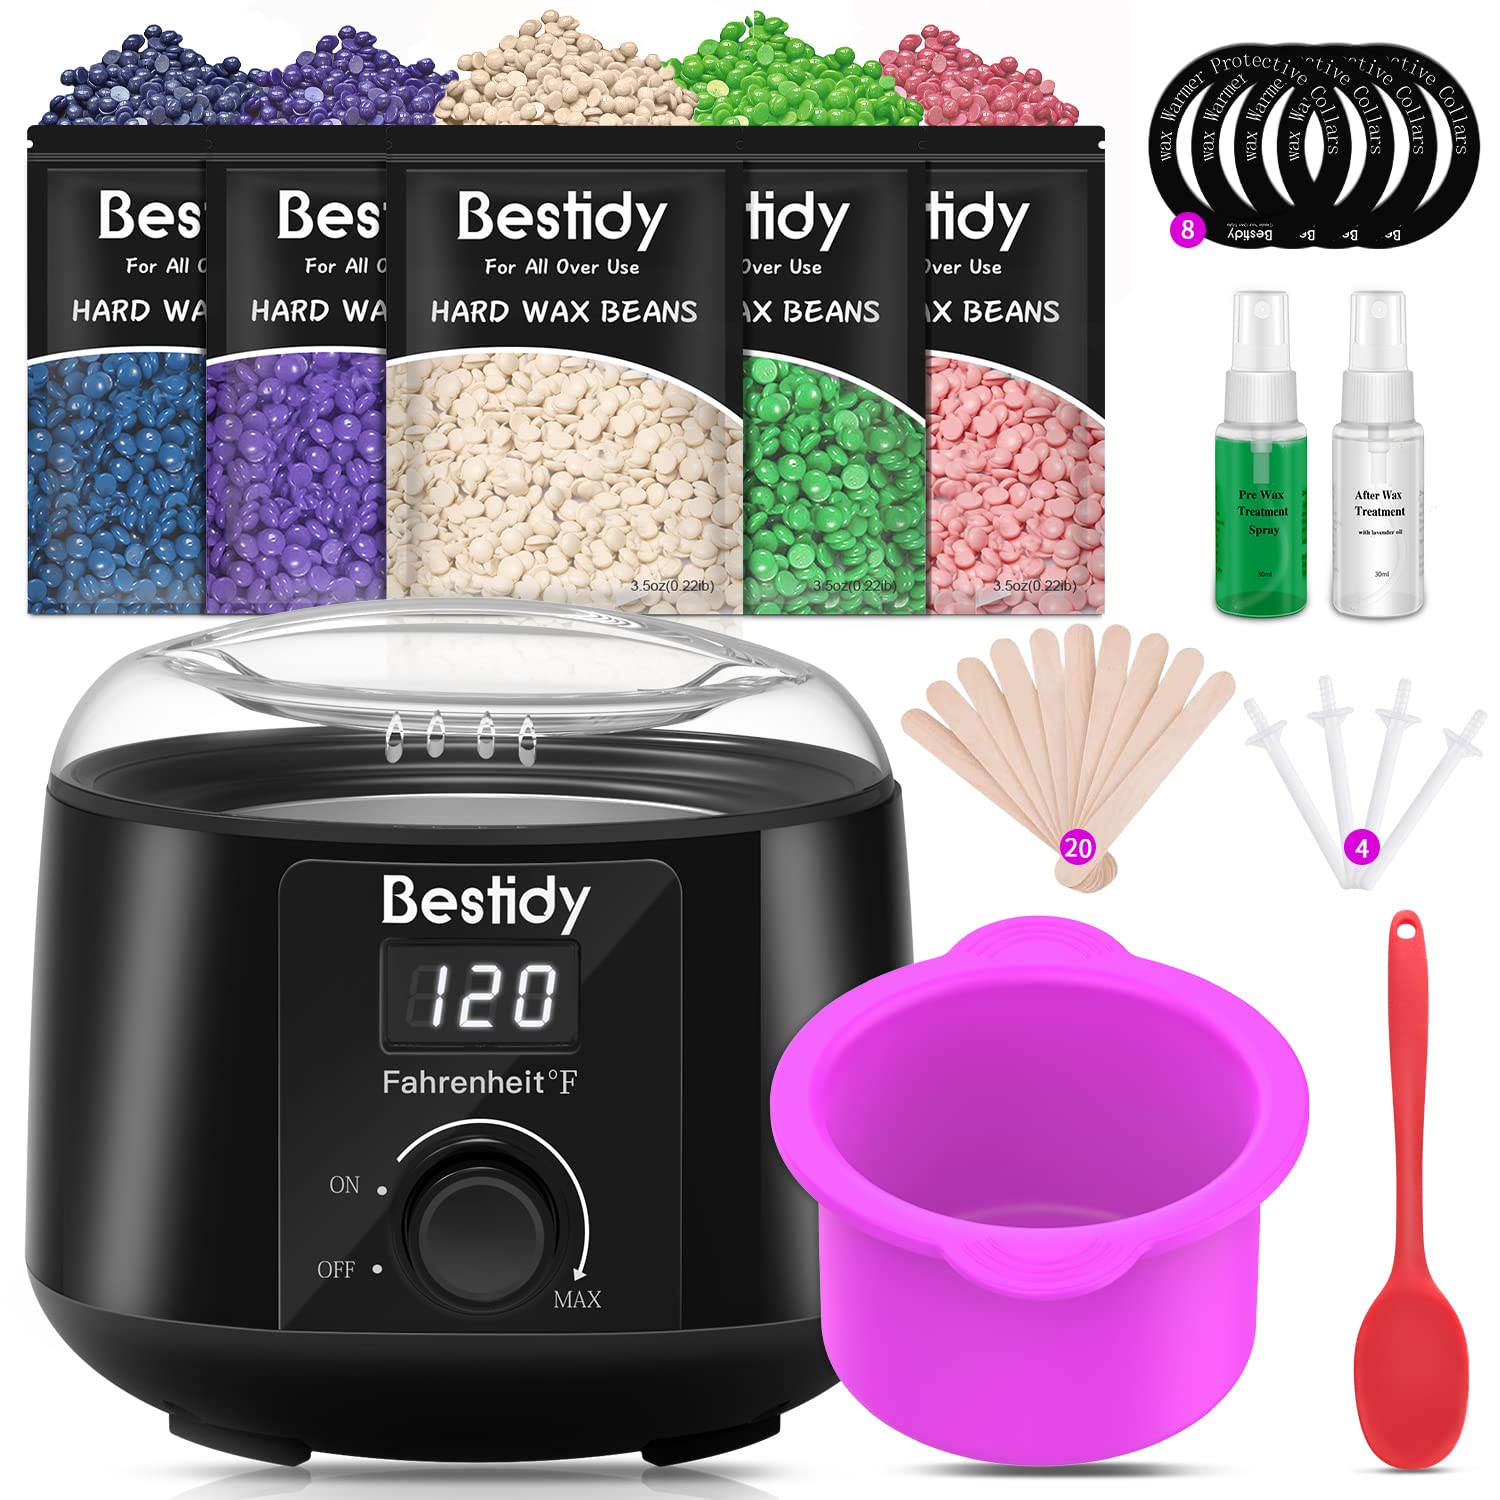 Bestidy Waxing Kit for Women and Men Home Wax Warmer with Hard Wax Beans  for Hair Removal for Brazilian Body Armpit Bikini Chest Legs Face Eyebrow -  Silicone Non-stick Bowl Black